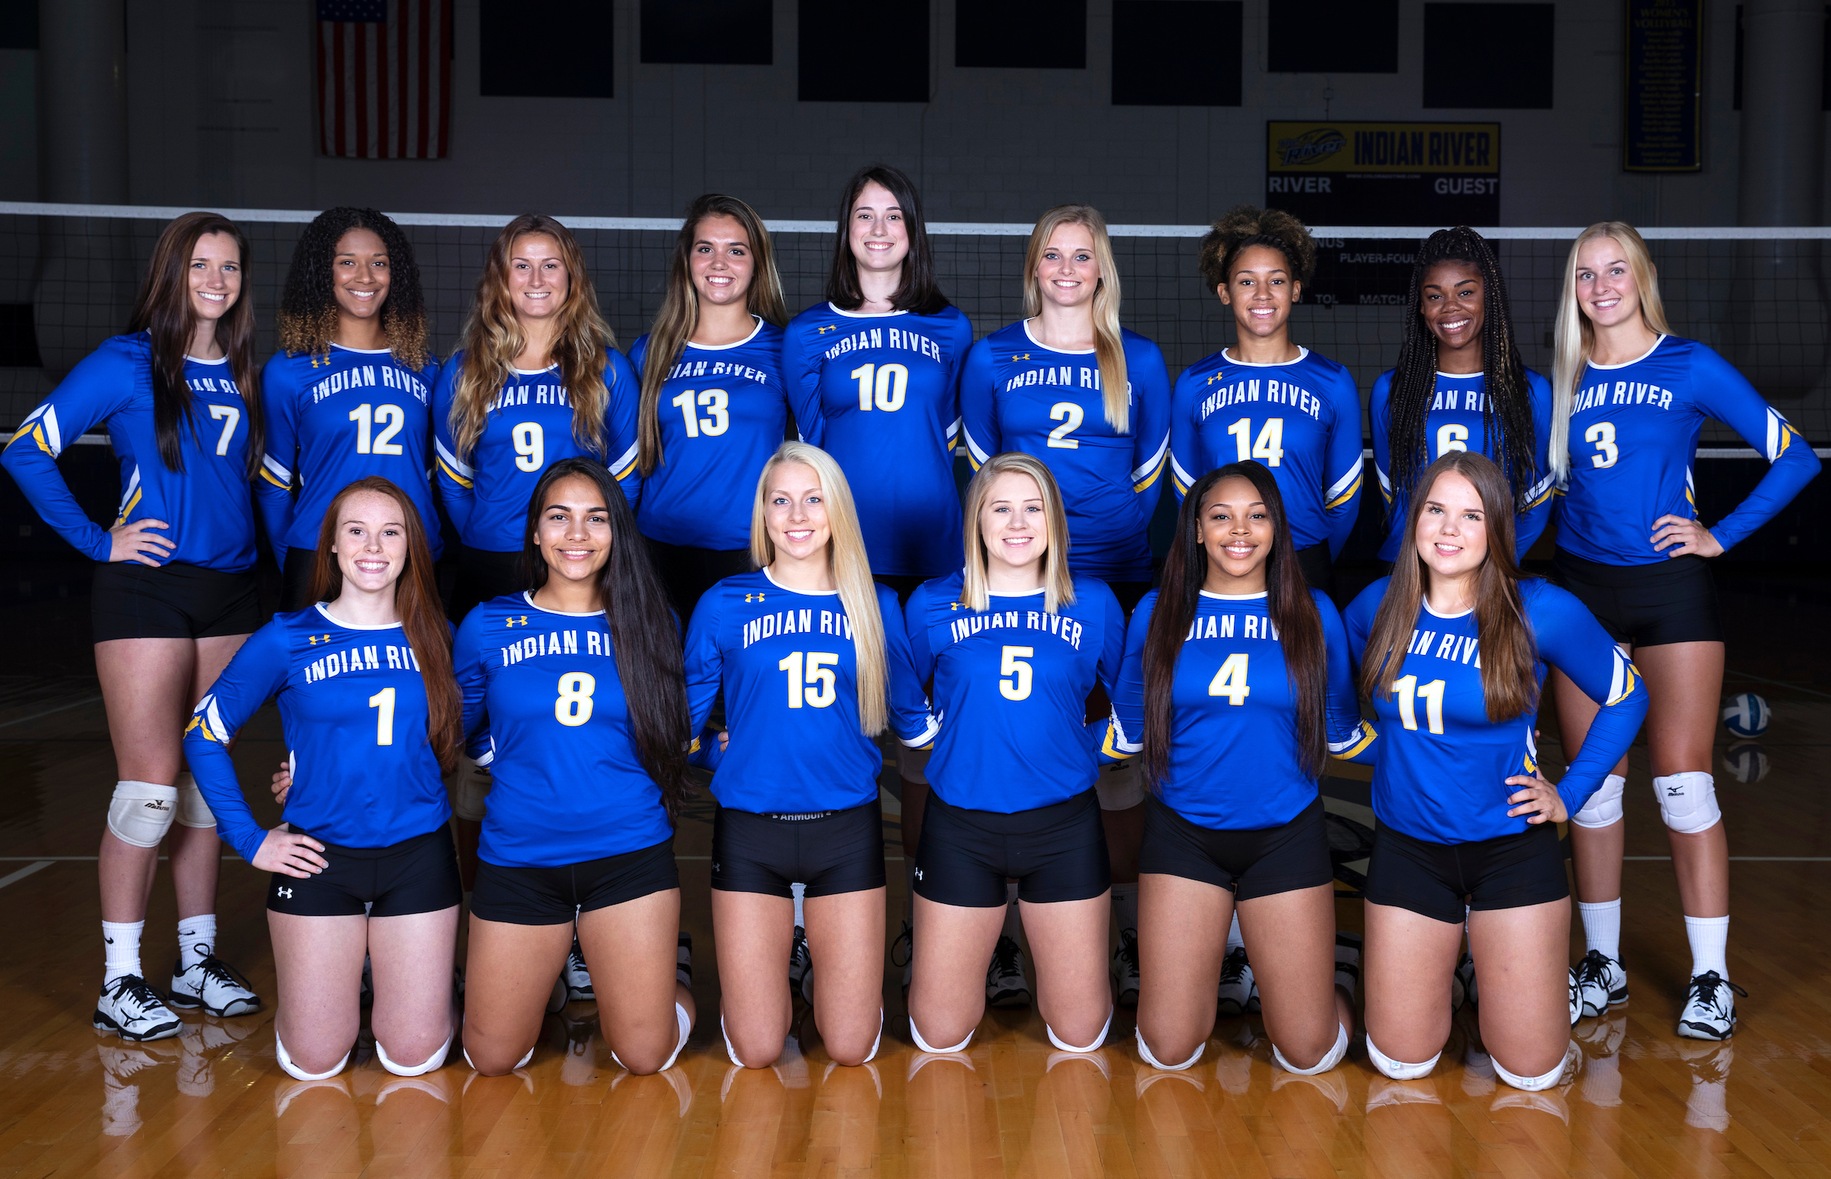 INDIAN RIVER VOLLEYBALL TEAM WINS 2019 FCSAA FEMALE ACADEMIC TEAM OF THE YEAR HONOR